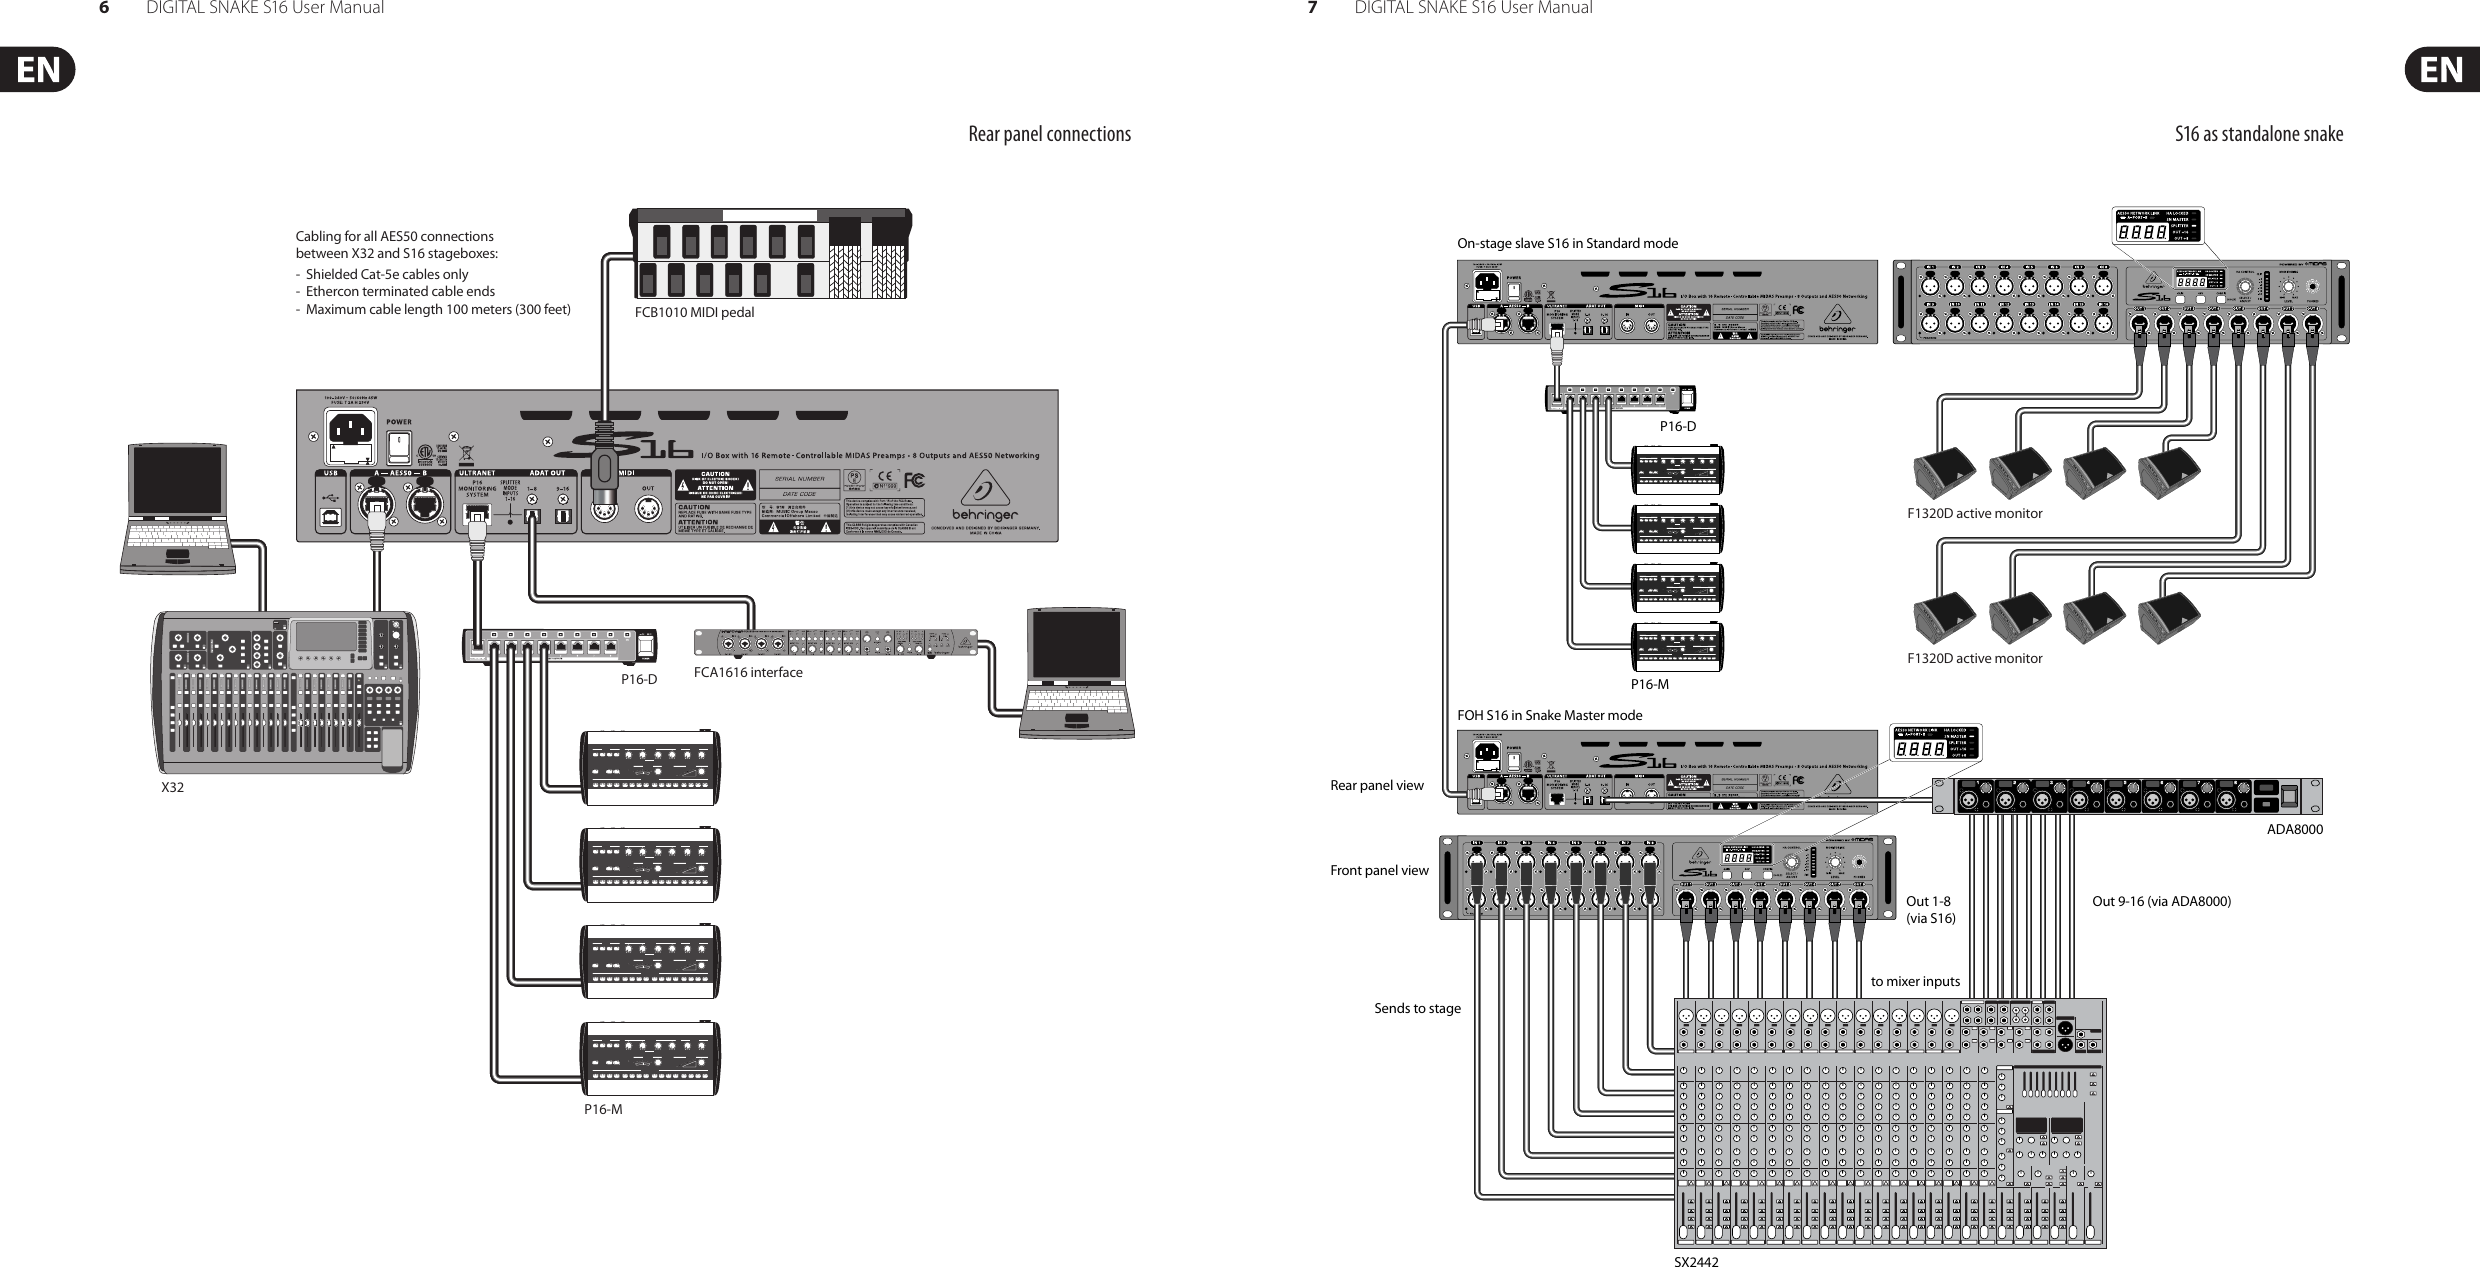 Page 4 of 9 - Behringer Behringer-S16-Users-Manual- DIGITAL SNAKE S16  Behringer-s16-users-manual